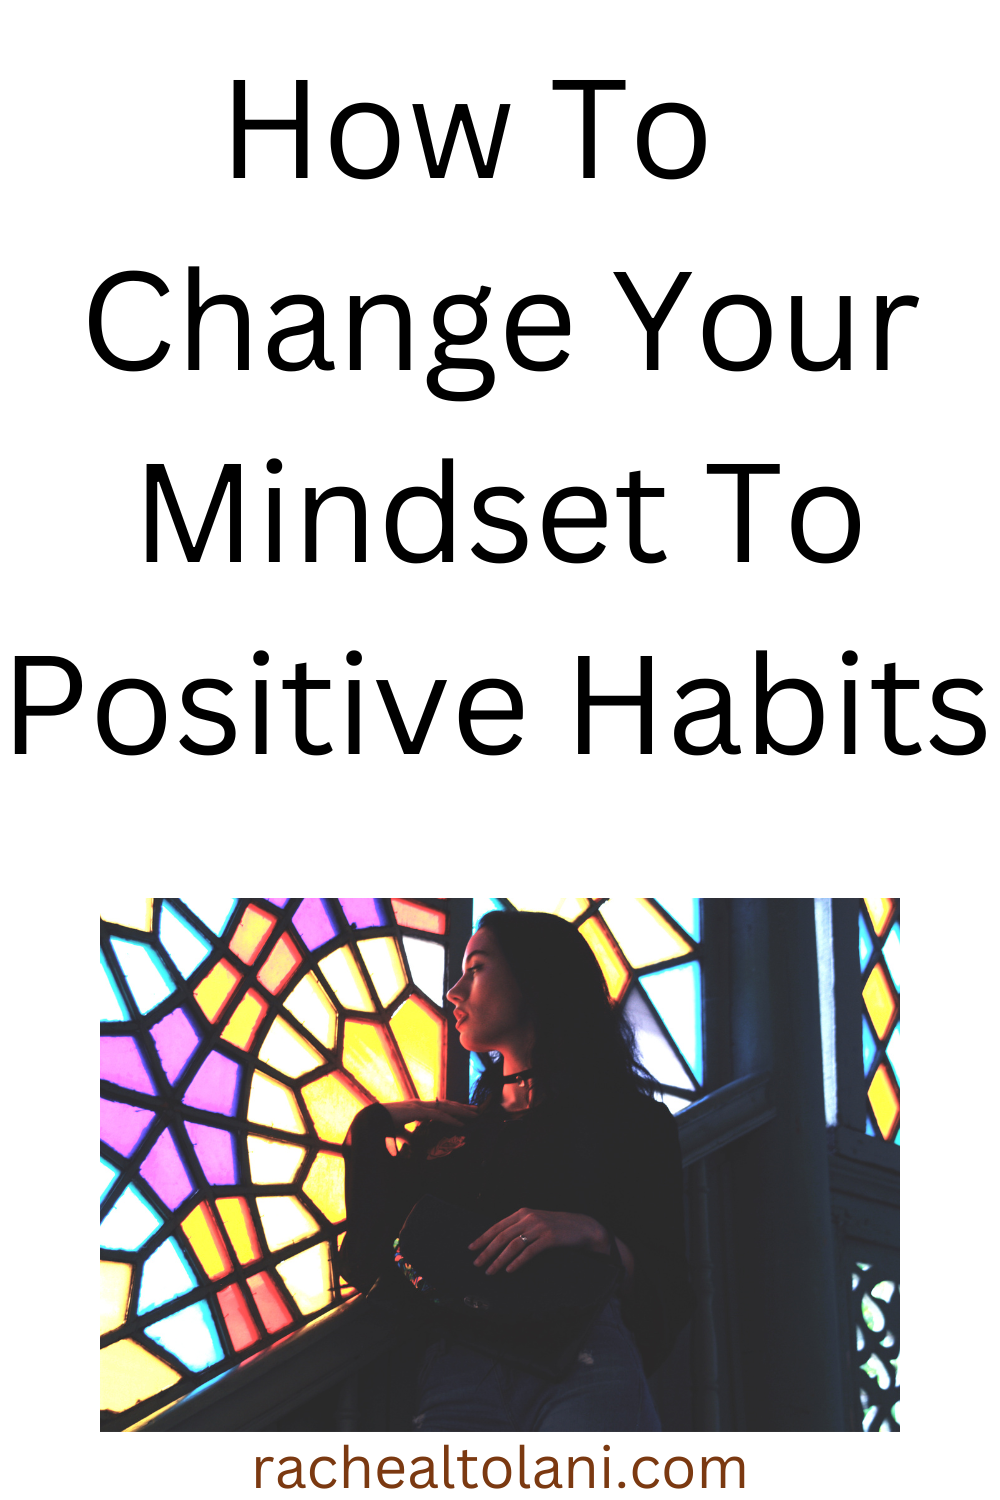 How to change your mindset